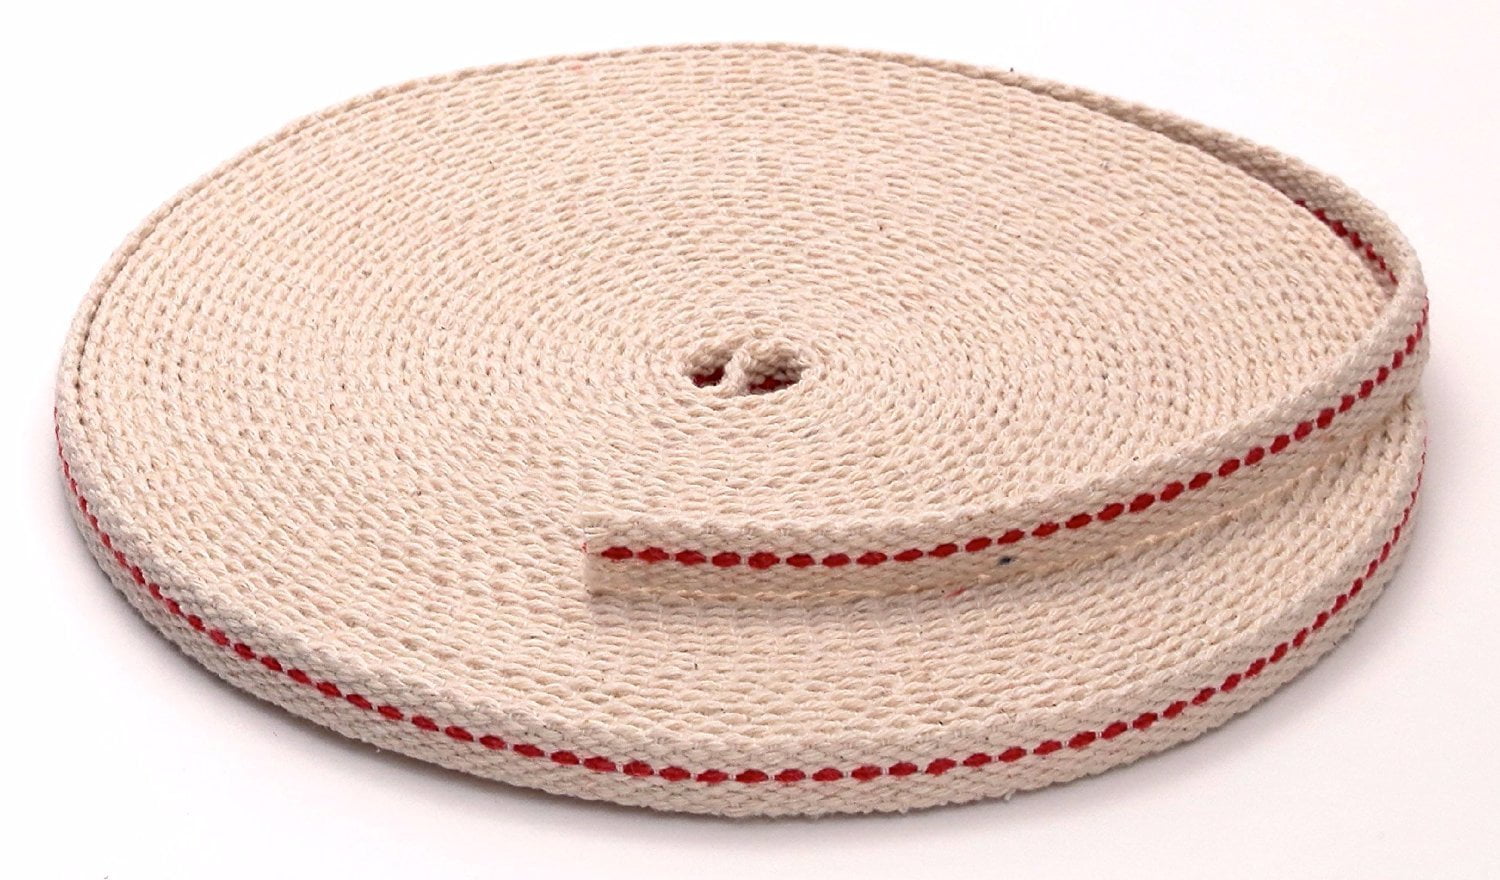 Light Of Mine 3/8 Inch 100% Cotton Flat Wick 6 Foot Roll for Paraffin Oil or Kerosene Based Lanterns and Oil Lamps with Genuine Red Stitch 3/8